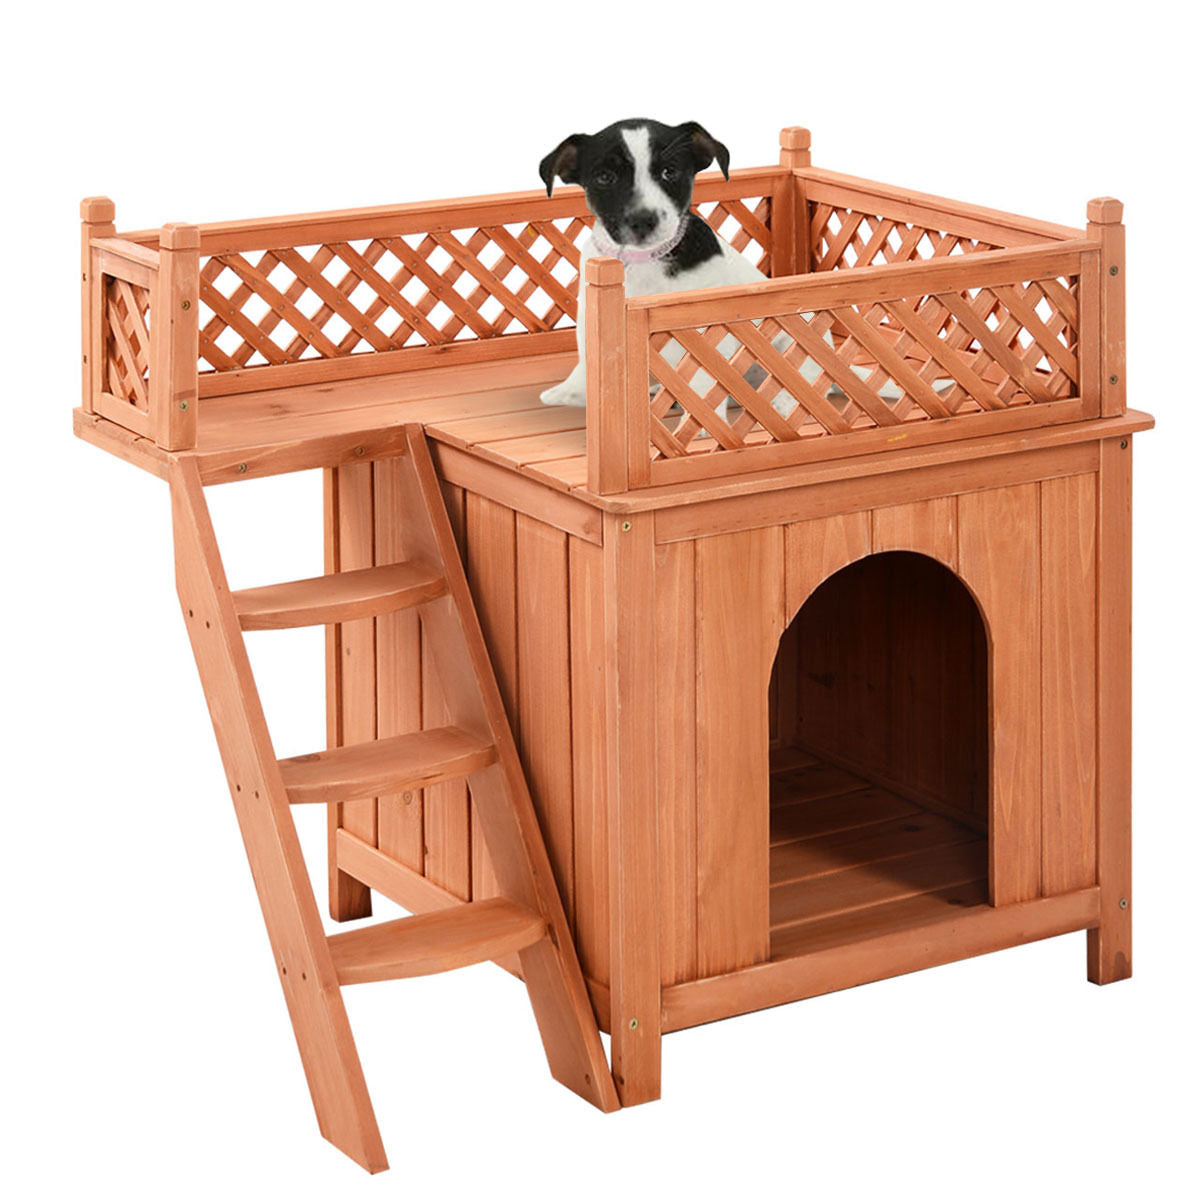 Costway Wooden Puppy Pet Dog House Wood Room